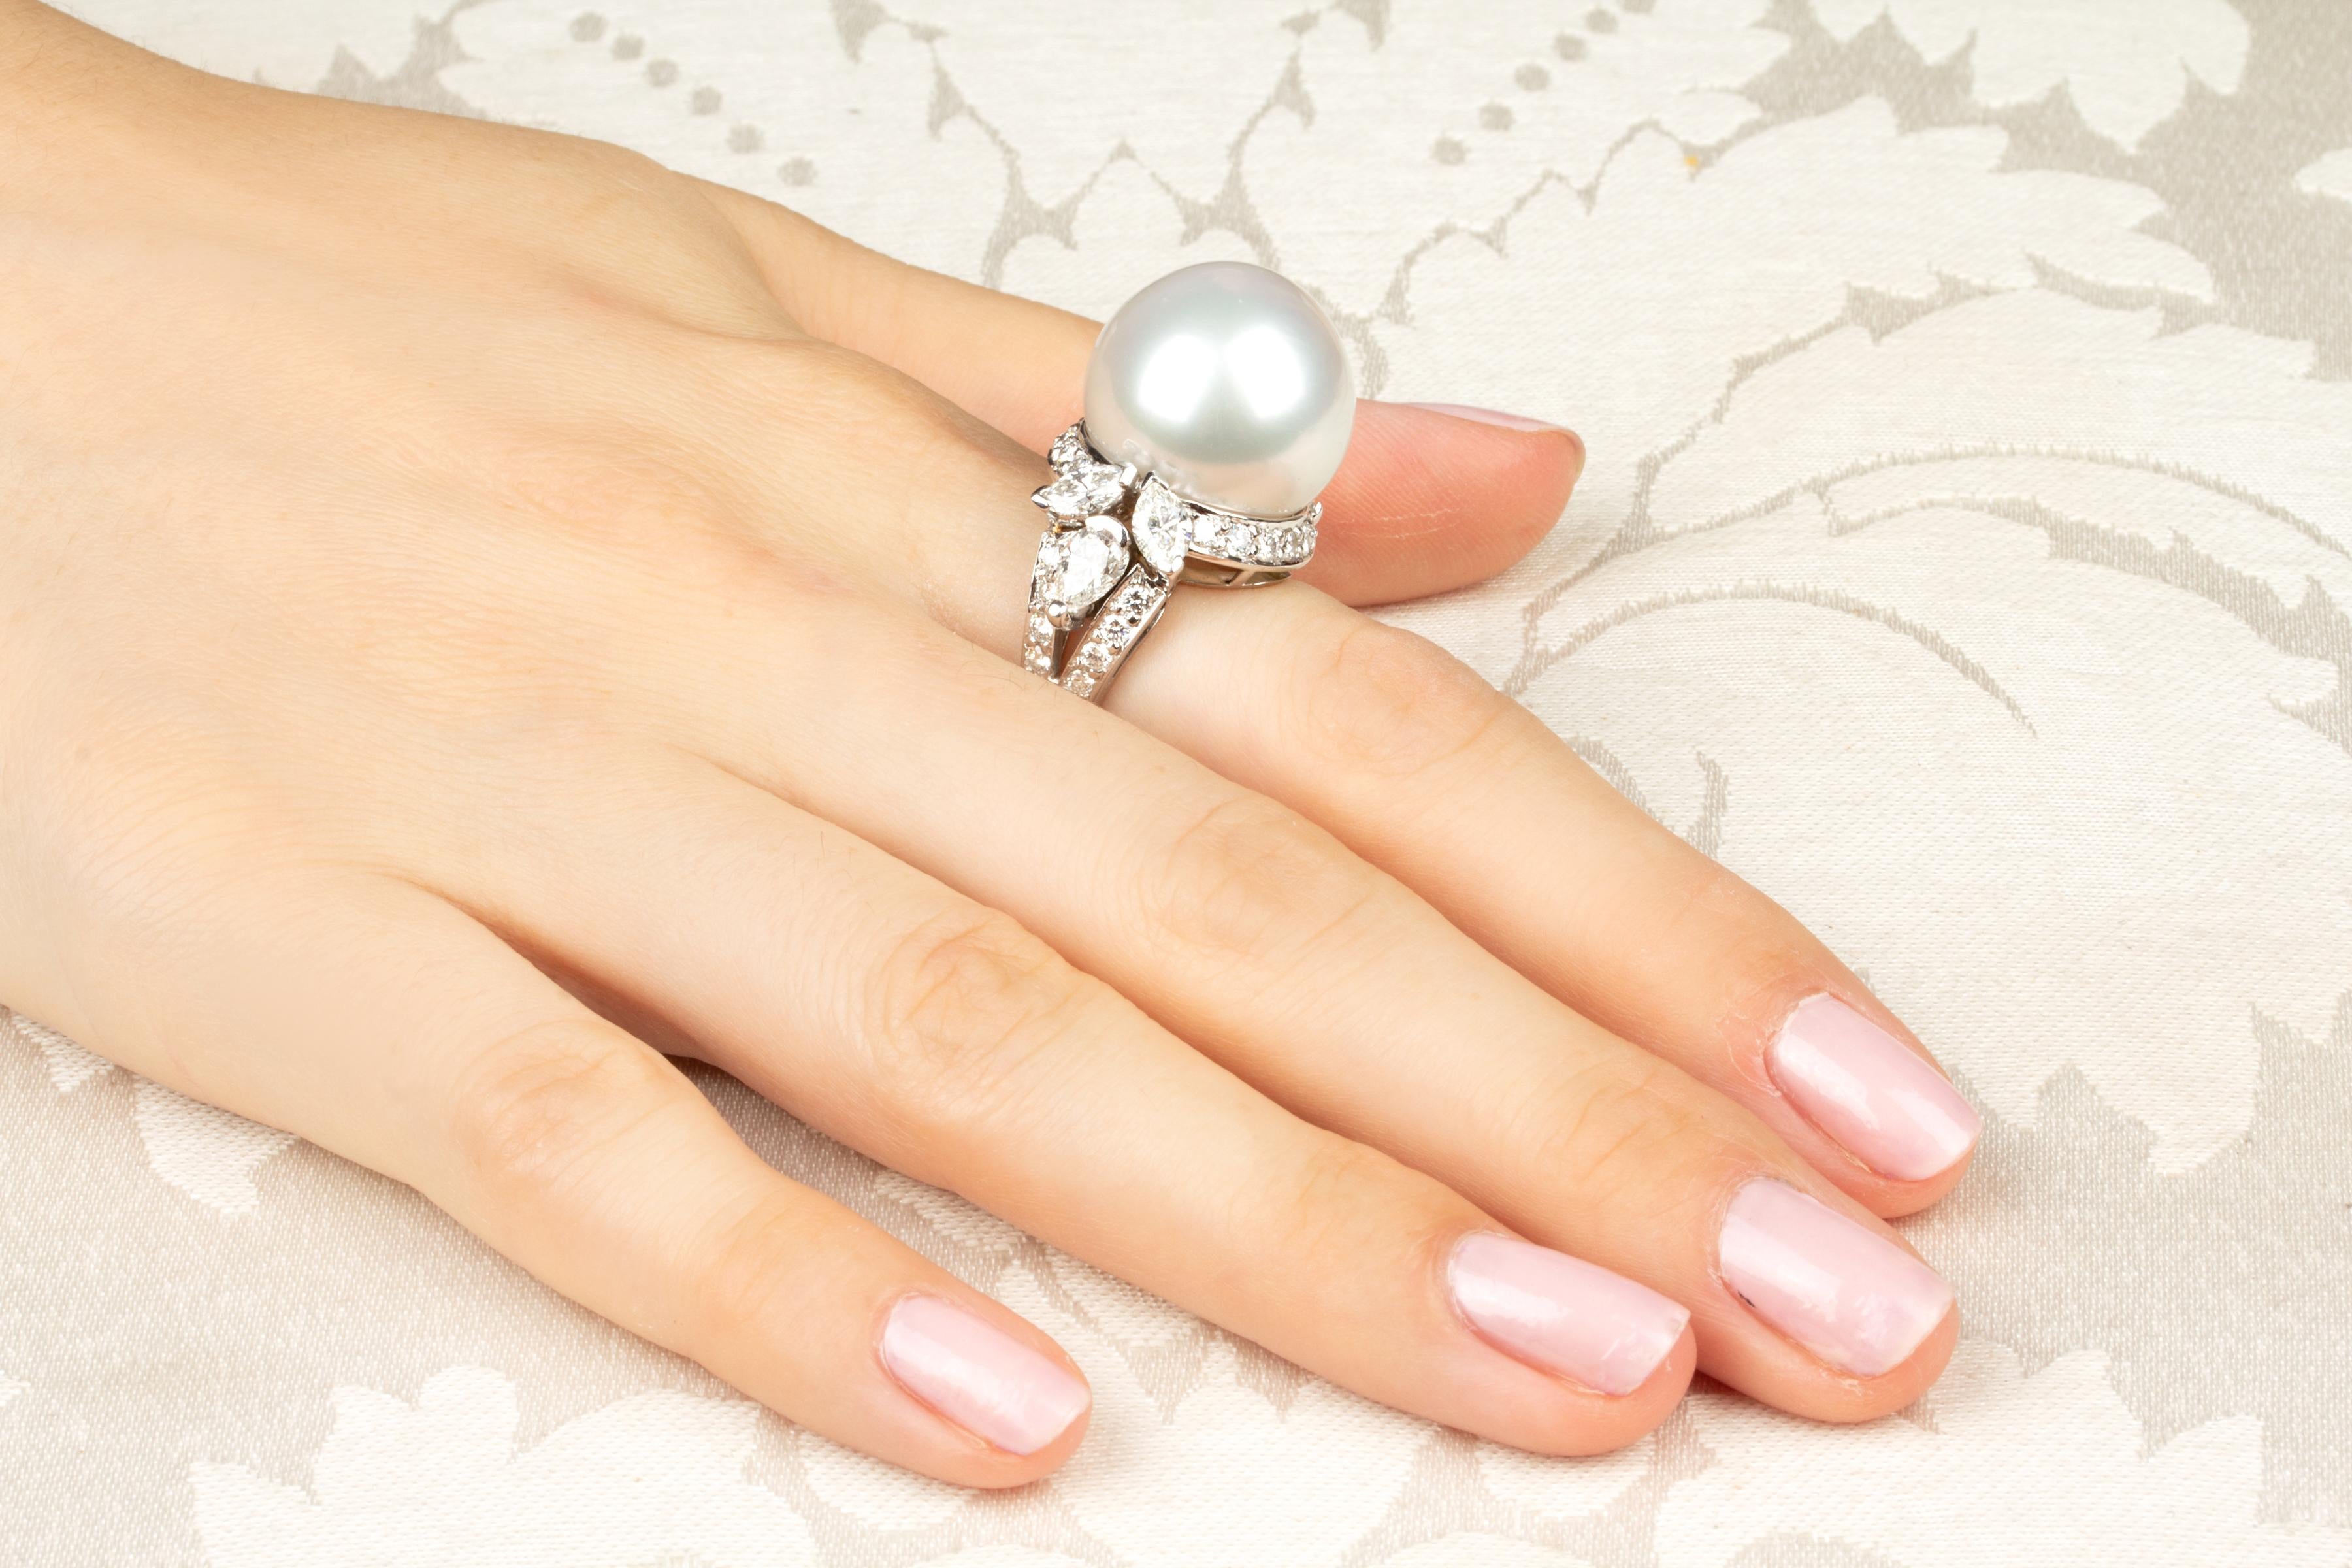 This pearl and diamond ring features a large South Sea pearl of 18mm diameter. The pearl is untreated. It displays a splendid nacre and its natural color and luster have not been enhanced in any way. The pearl is flanked by a leaf-like design with